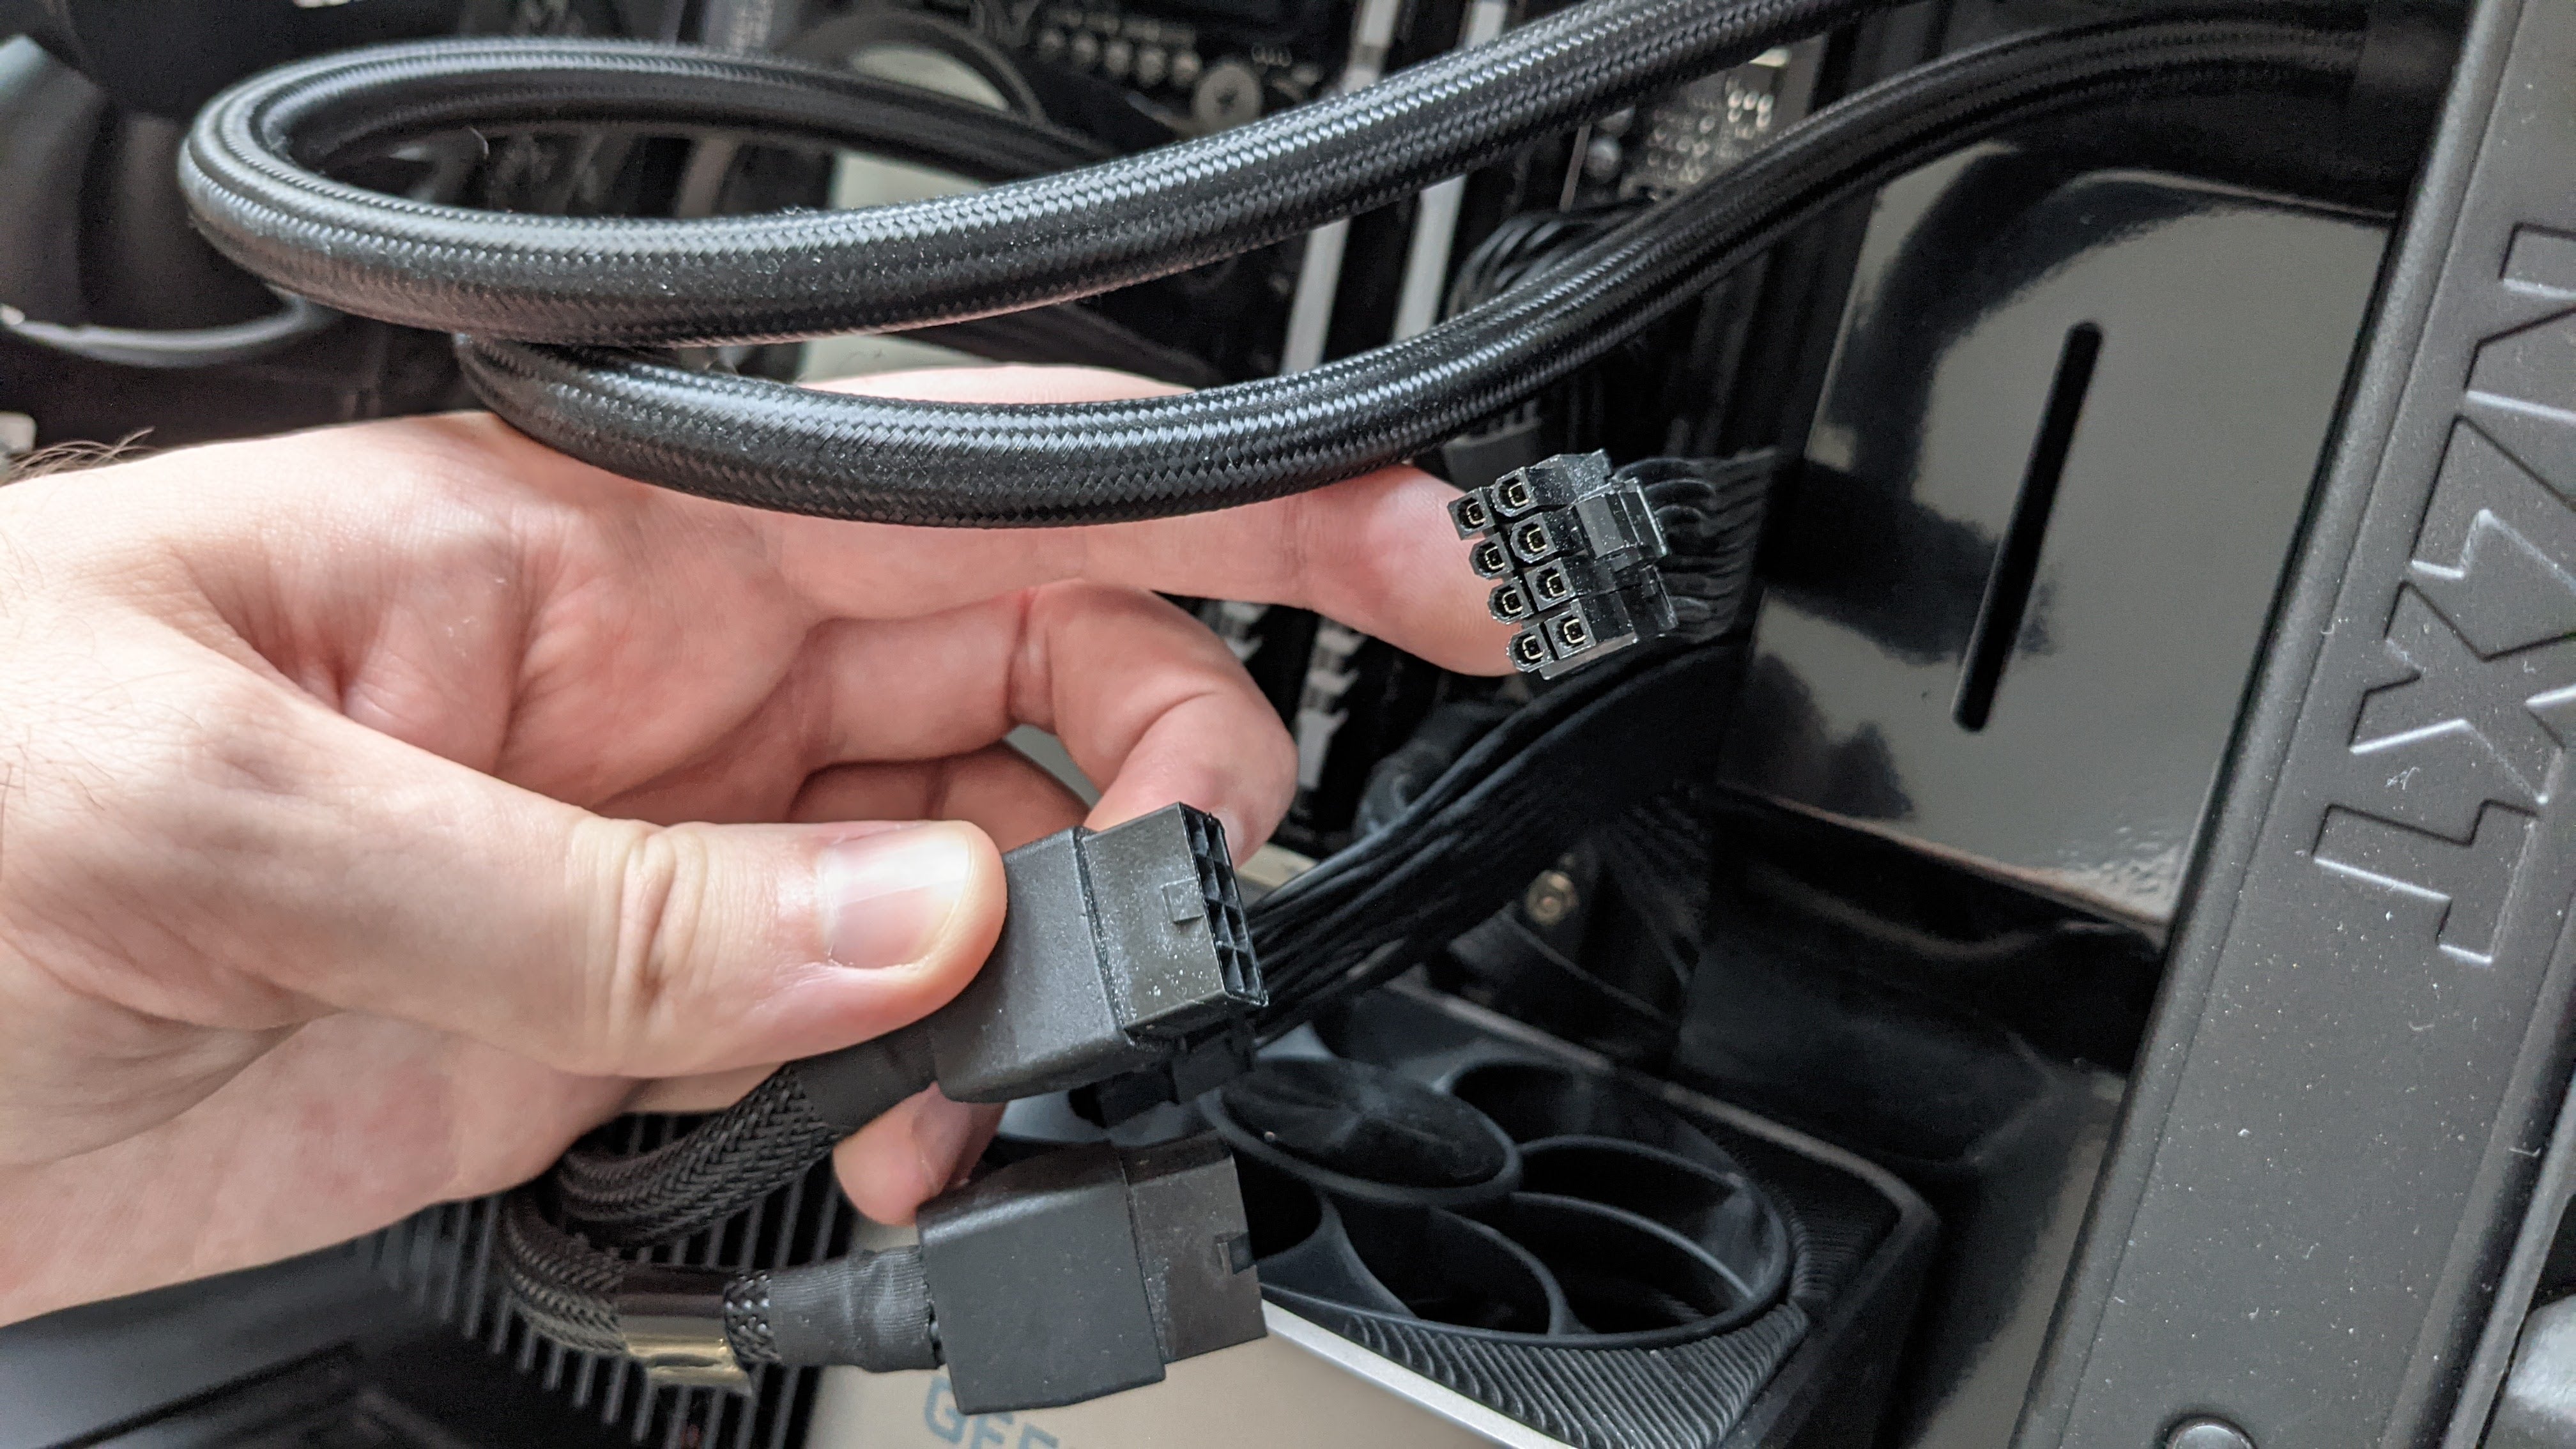 A PCIe power cable being held up next to Nvidia's RTX 30 series power adapter.